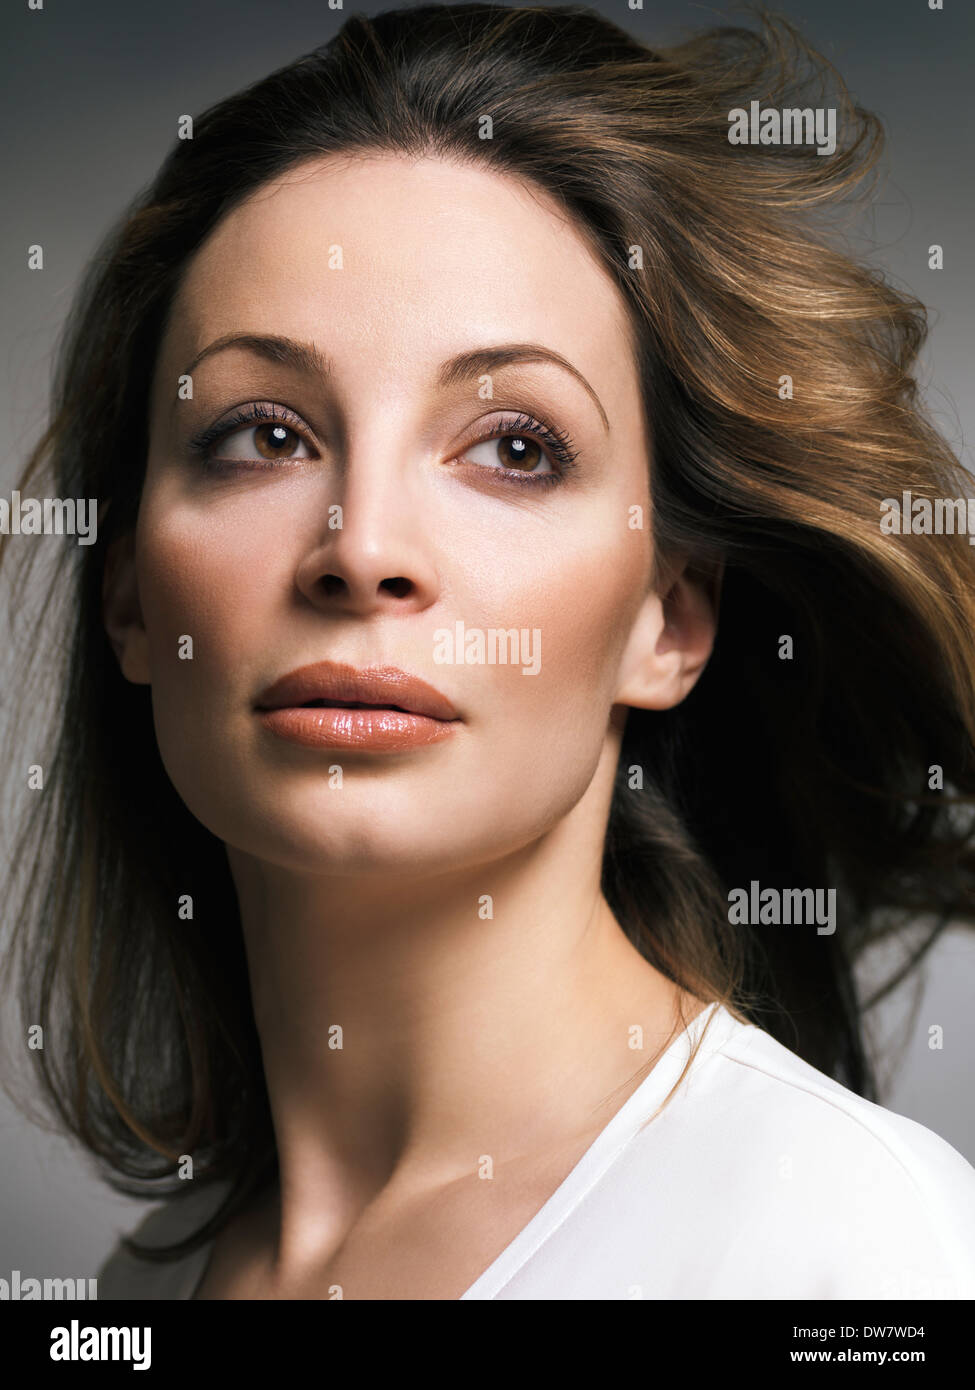 Beauty portrait of a woman with light brown hair and natural makeup in her thirties Stock Photo